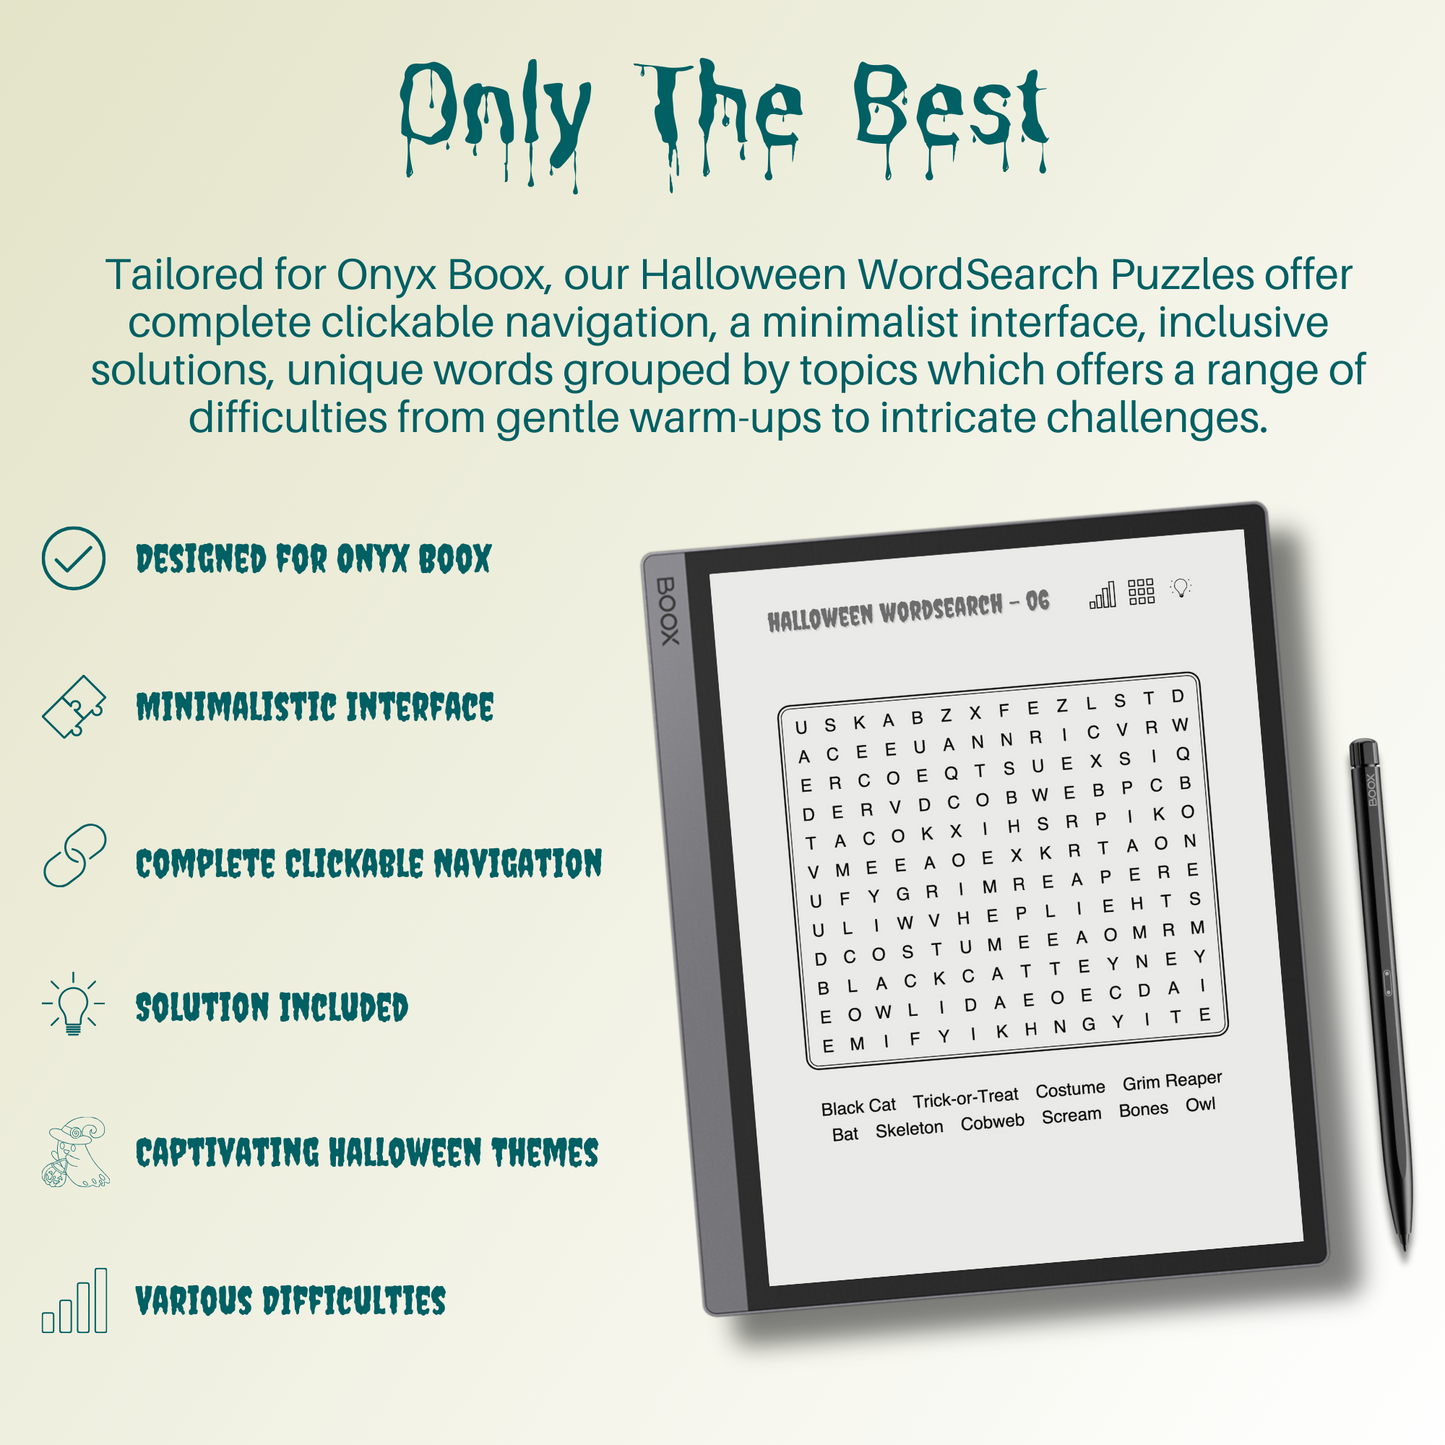 Onyx Boox Halloween Word Search Puzzles